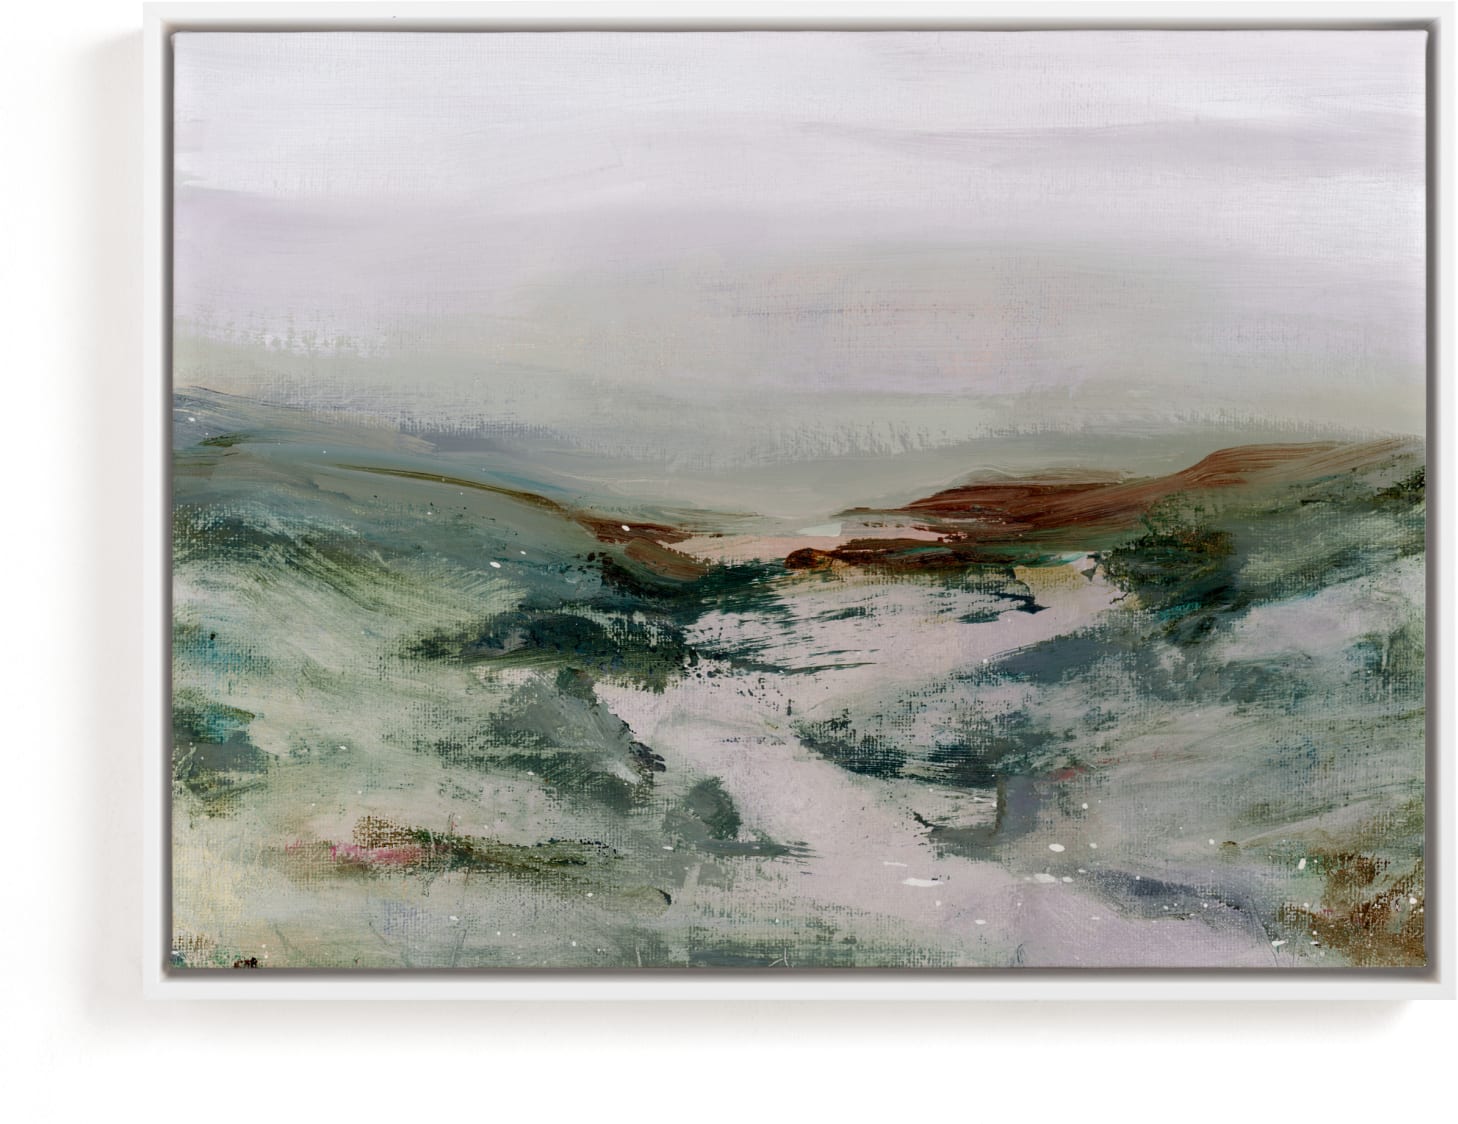 This is a white art by Lindsay Megahed called Green Valley.